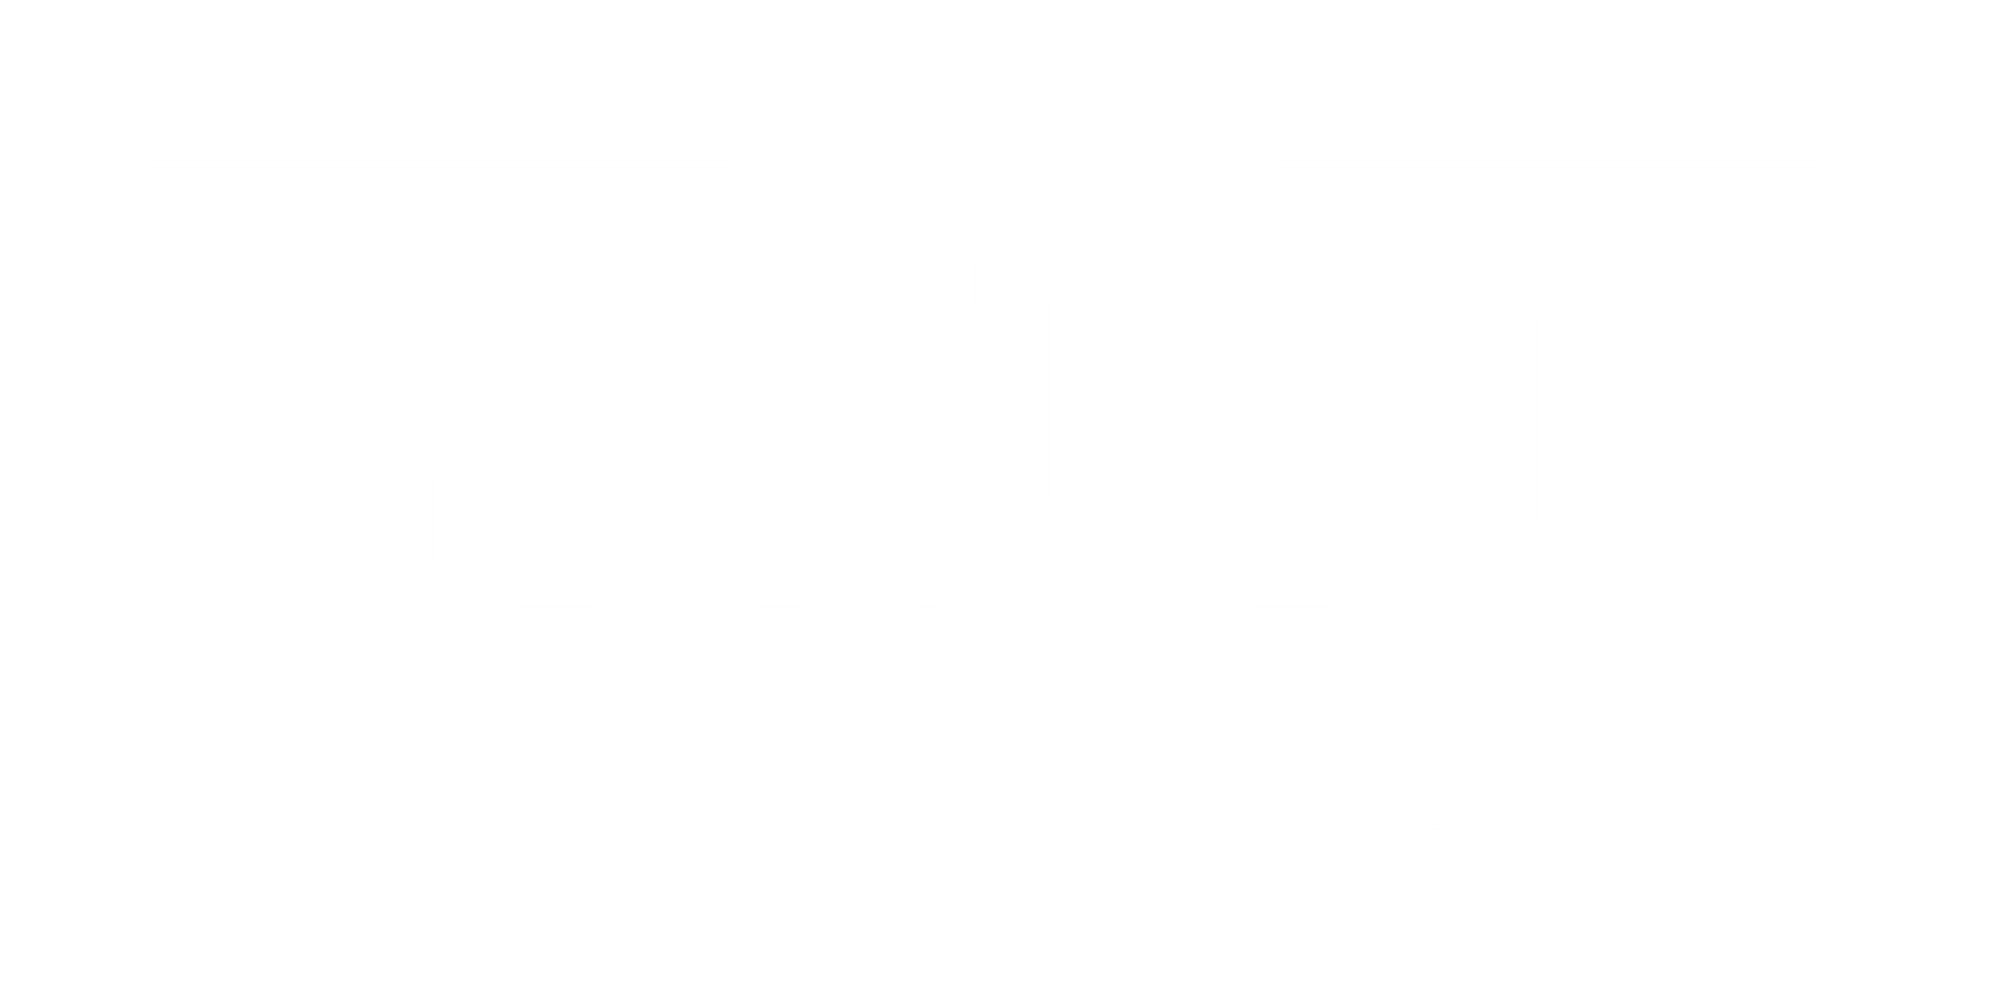 Greens Food Fare Lisburn - Speciality foods from around the world.